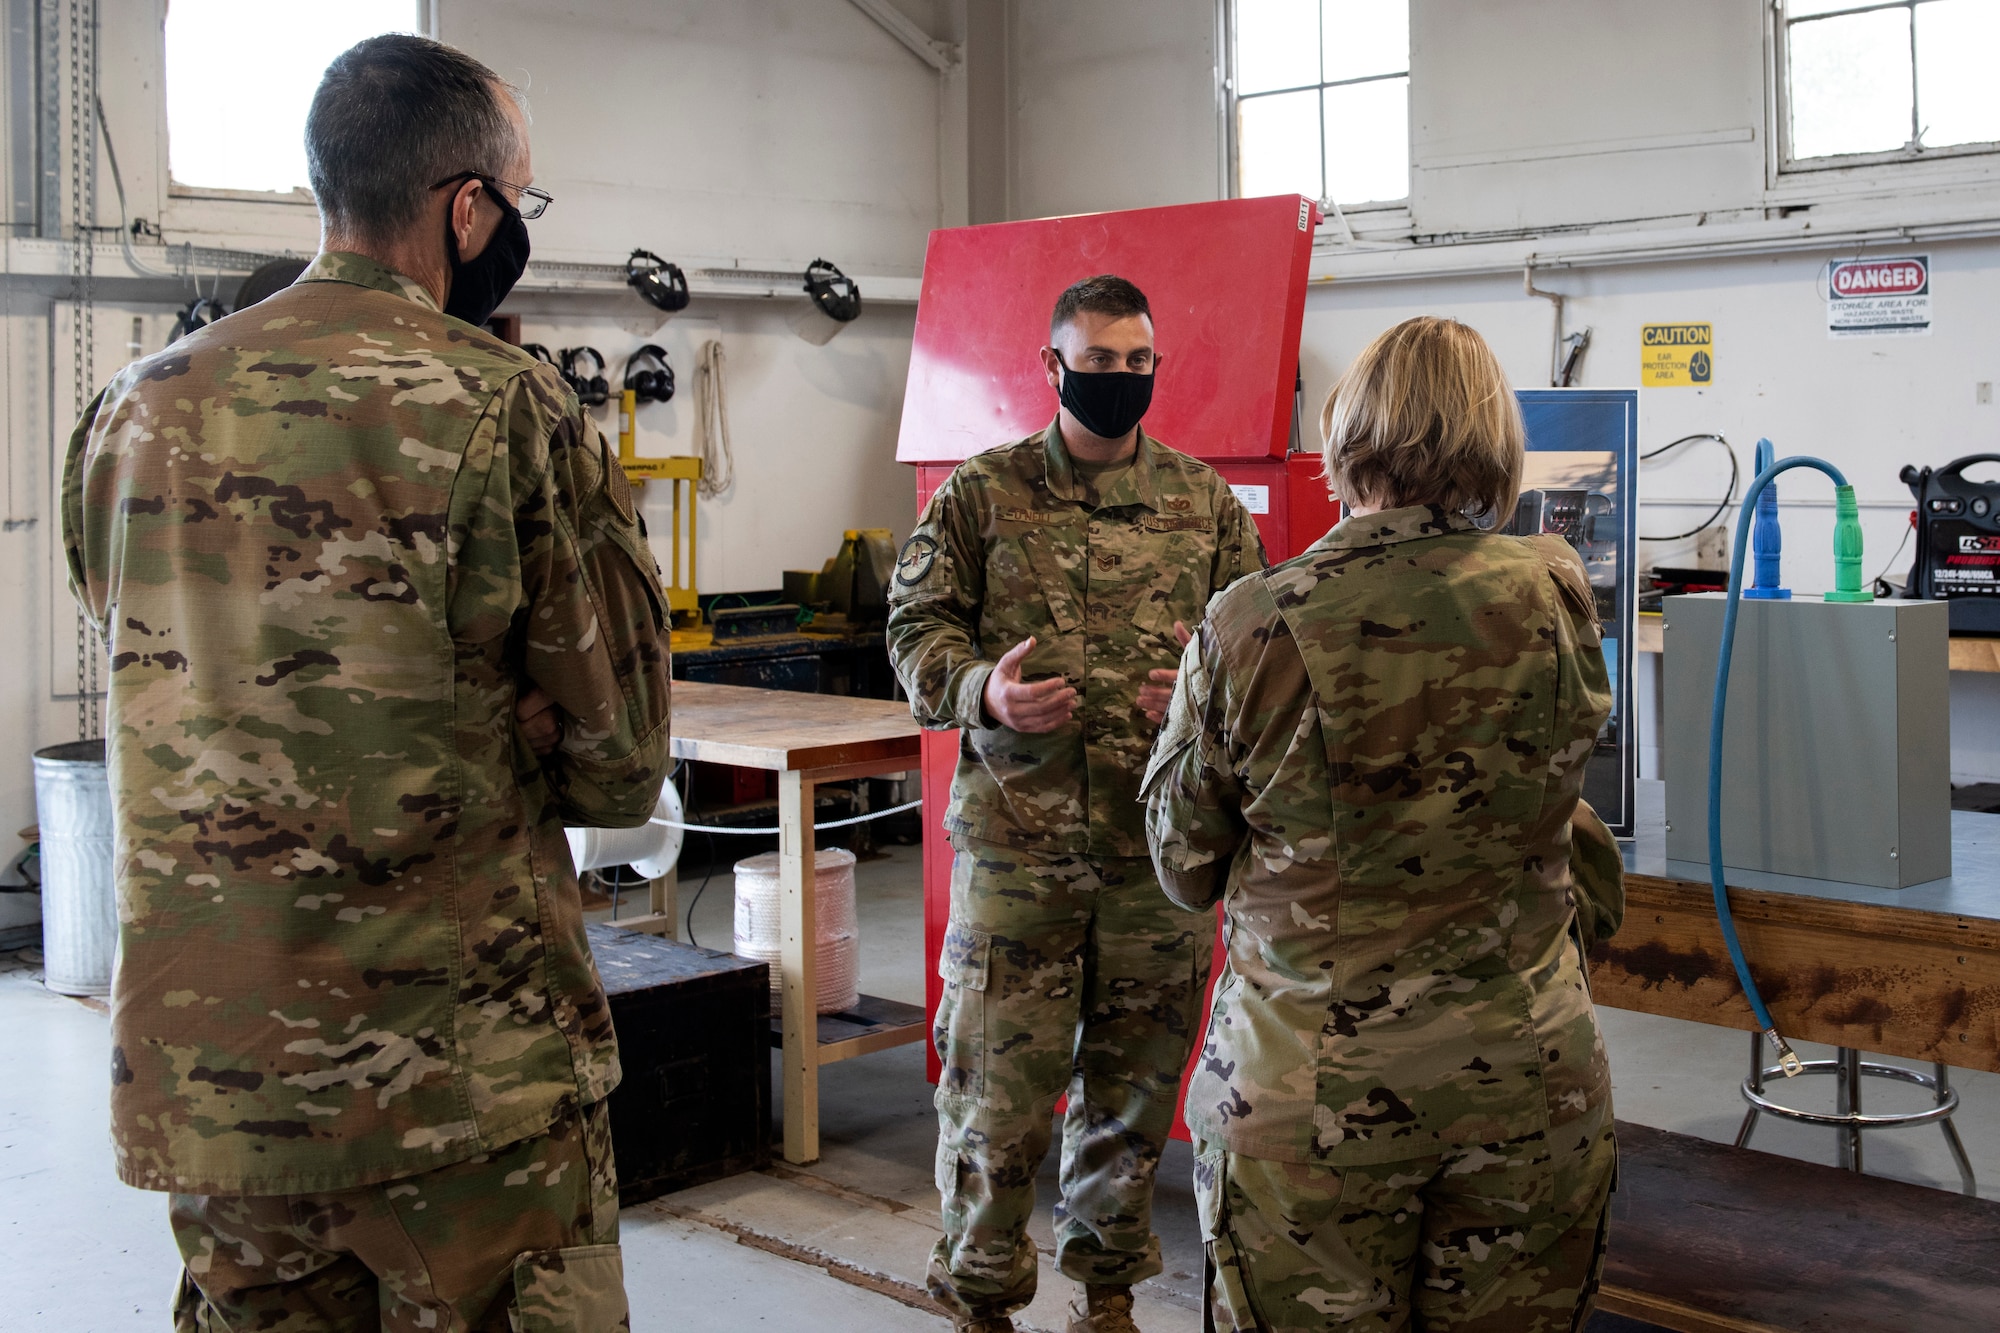 U.S. Air Force Tech. Sgt. Jared O’Neill, 773d Civil Engineer Squadron electrical power productions craftsman, briefs U.S. Air Force Col. Kirsten Aguilar, Joint Base Elmendorf-Richardson and 673d Air Base Wing commander, and U.S. Air Force Chief Master Sgt. Lee Mills, left, JBER and 673d ABW command chief, on power production’s innovation projects during a 773d CES immersion tour at JBER, Alaska, Sept. 1, 2020. Aguilar familiarized herself with the 773d CES and its role in supporting installation readiness after taking command of the installation on July 14, 2020. The 773d CES maintains structures throughout the base as well as runs the installation’s emergency management program.